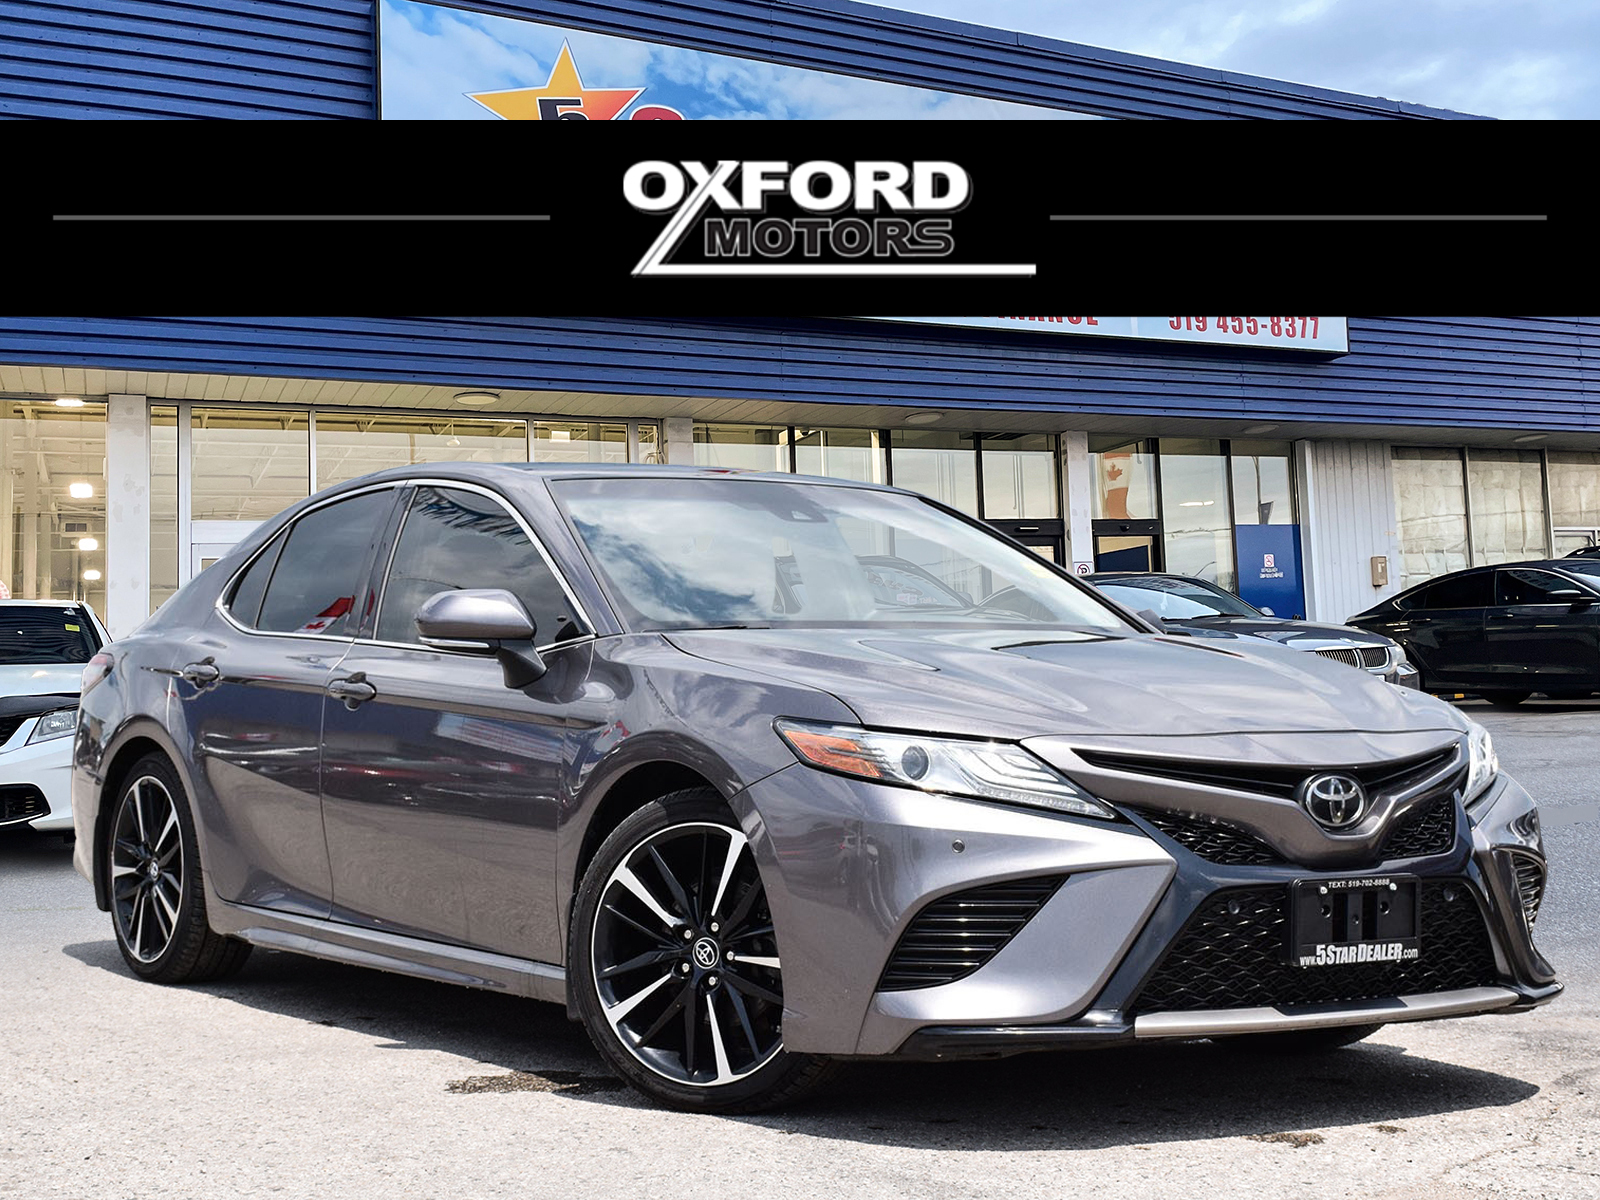 2018 Toyota Camry LEATHER PANO ROOF NAV ! WE FINANCE ALL CREDIT!